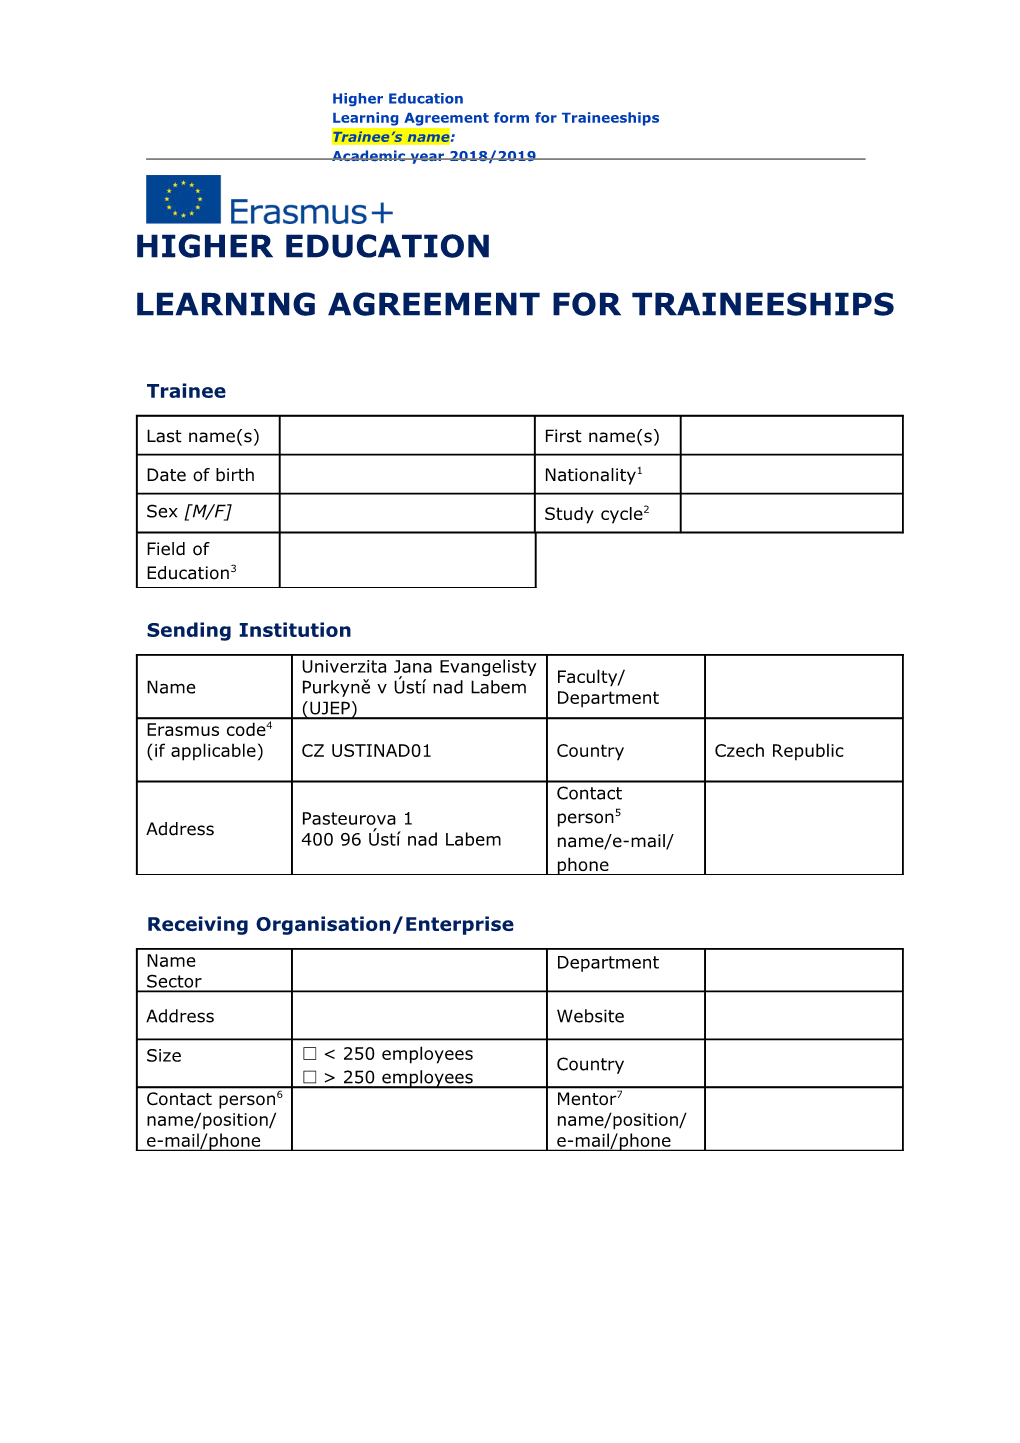 Learning Agreement for Traineeships s5